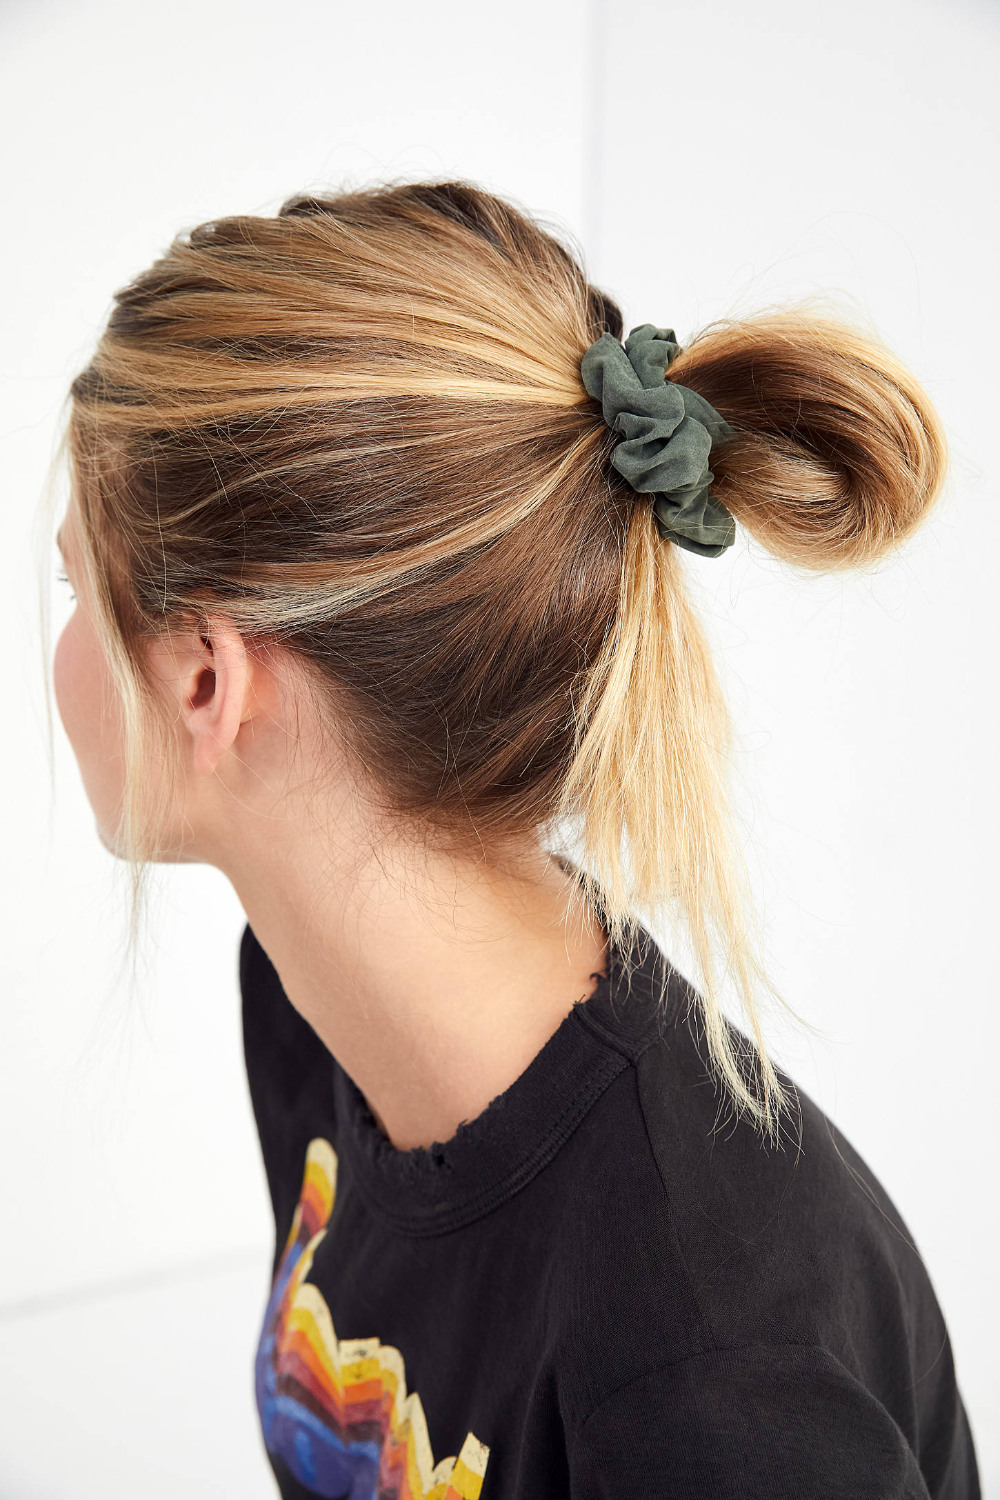 Days Of The Week Scrunchie Set - Days Of The Week Scrunchie Set -   14 beauty Day of the week ideas